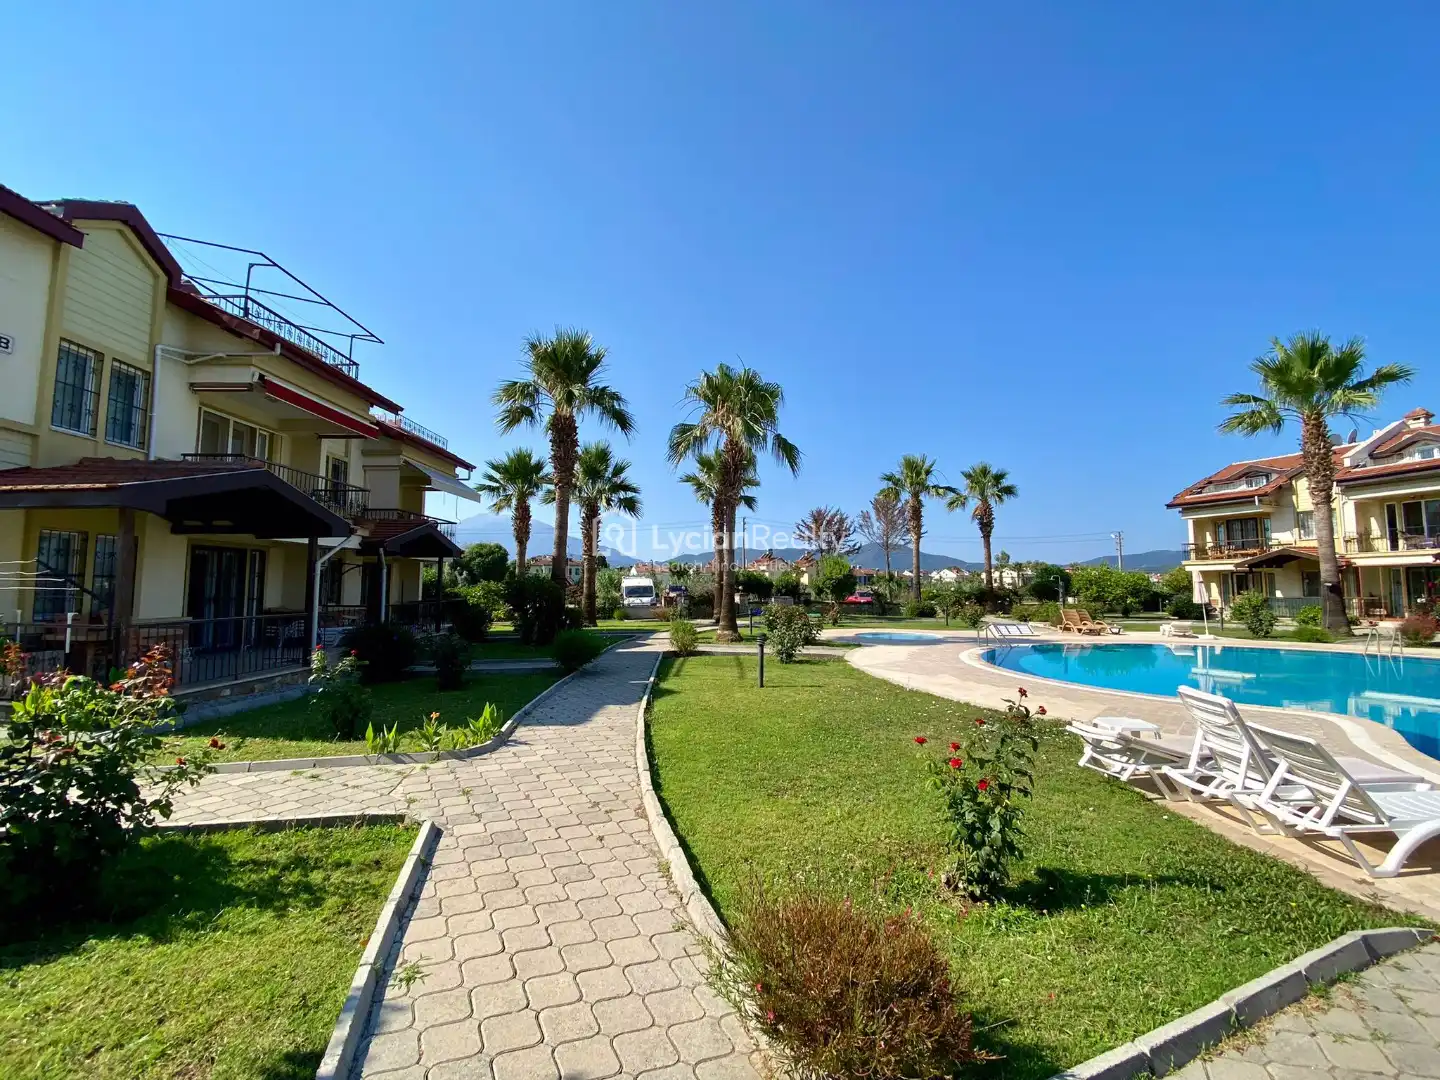 Flat Green - Turkish Houses with Large Gardens and Pools